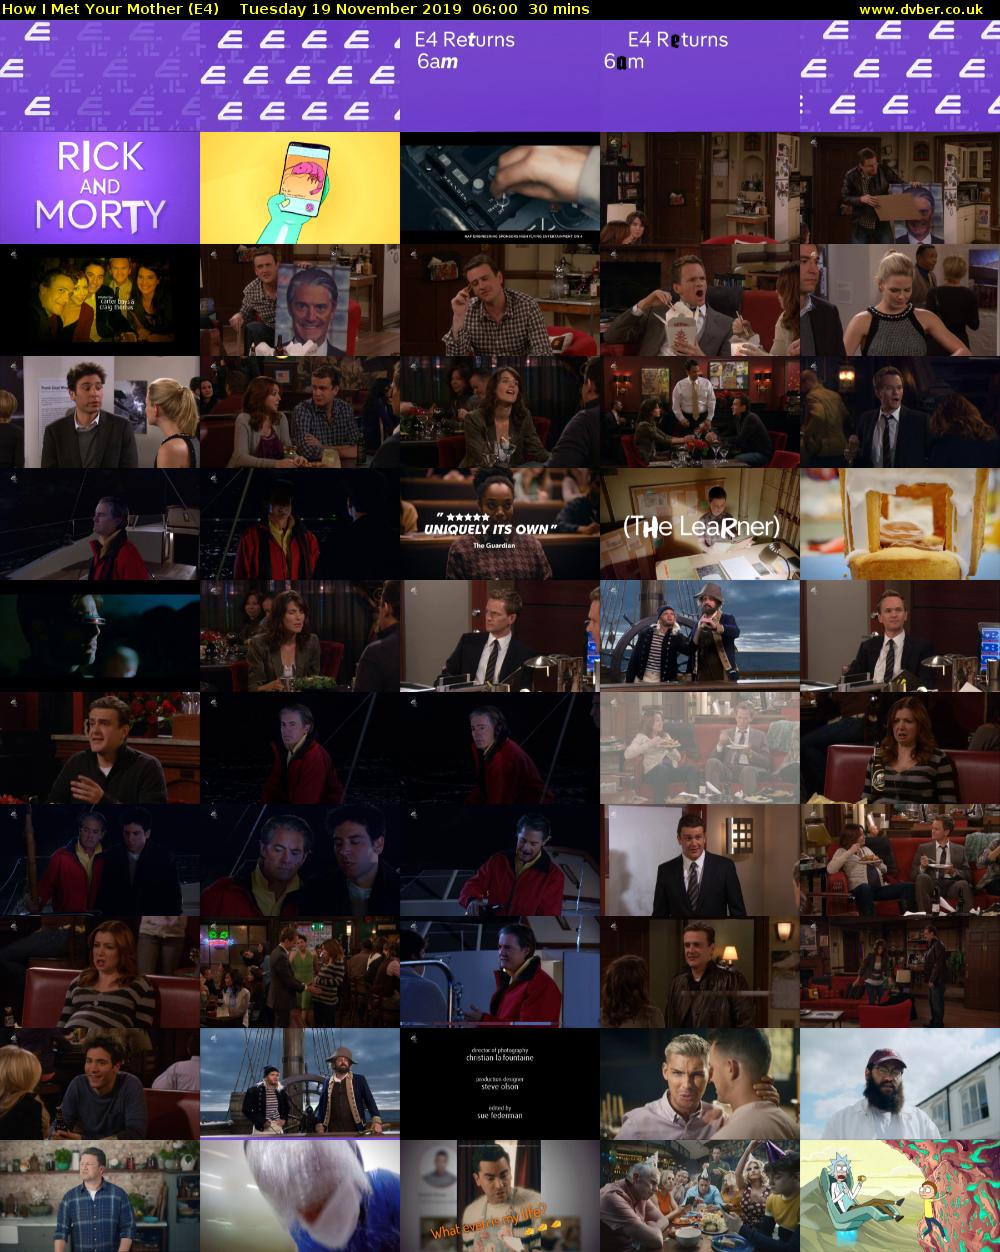 How I Met Your Mother (E4) Tuesday 19 November 2019 06:00 - 06:30